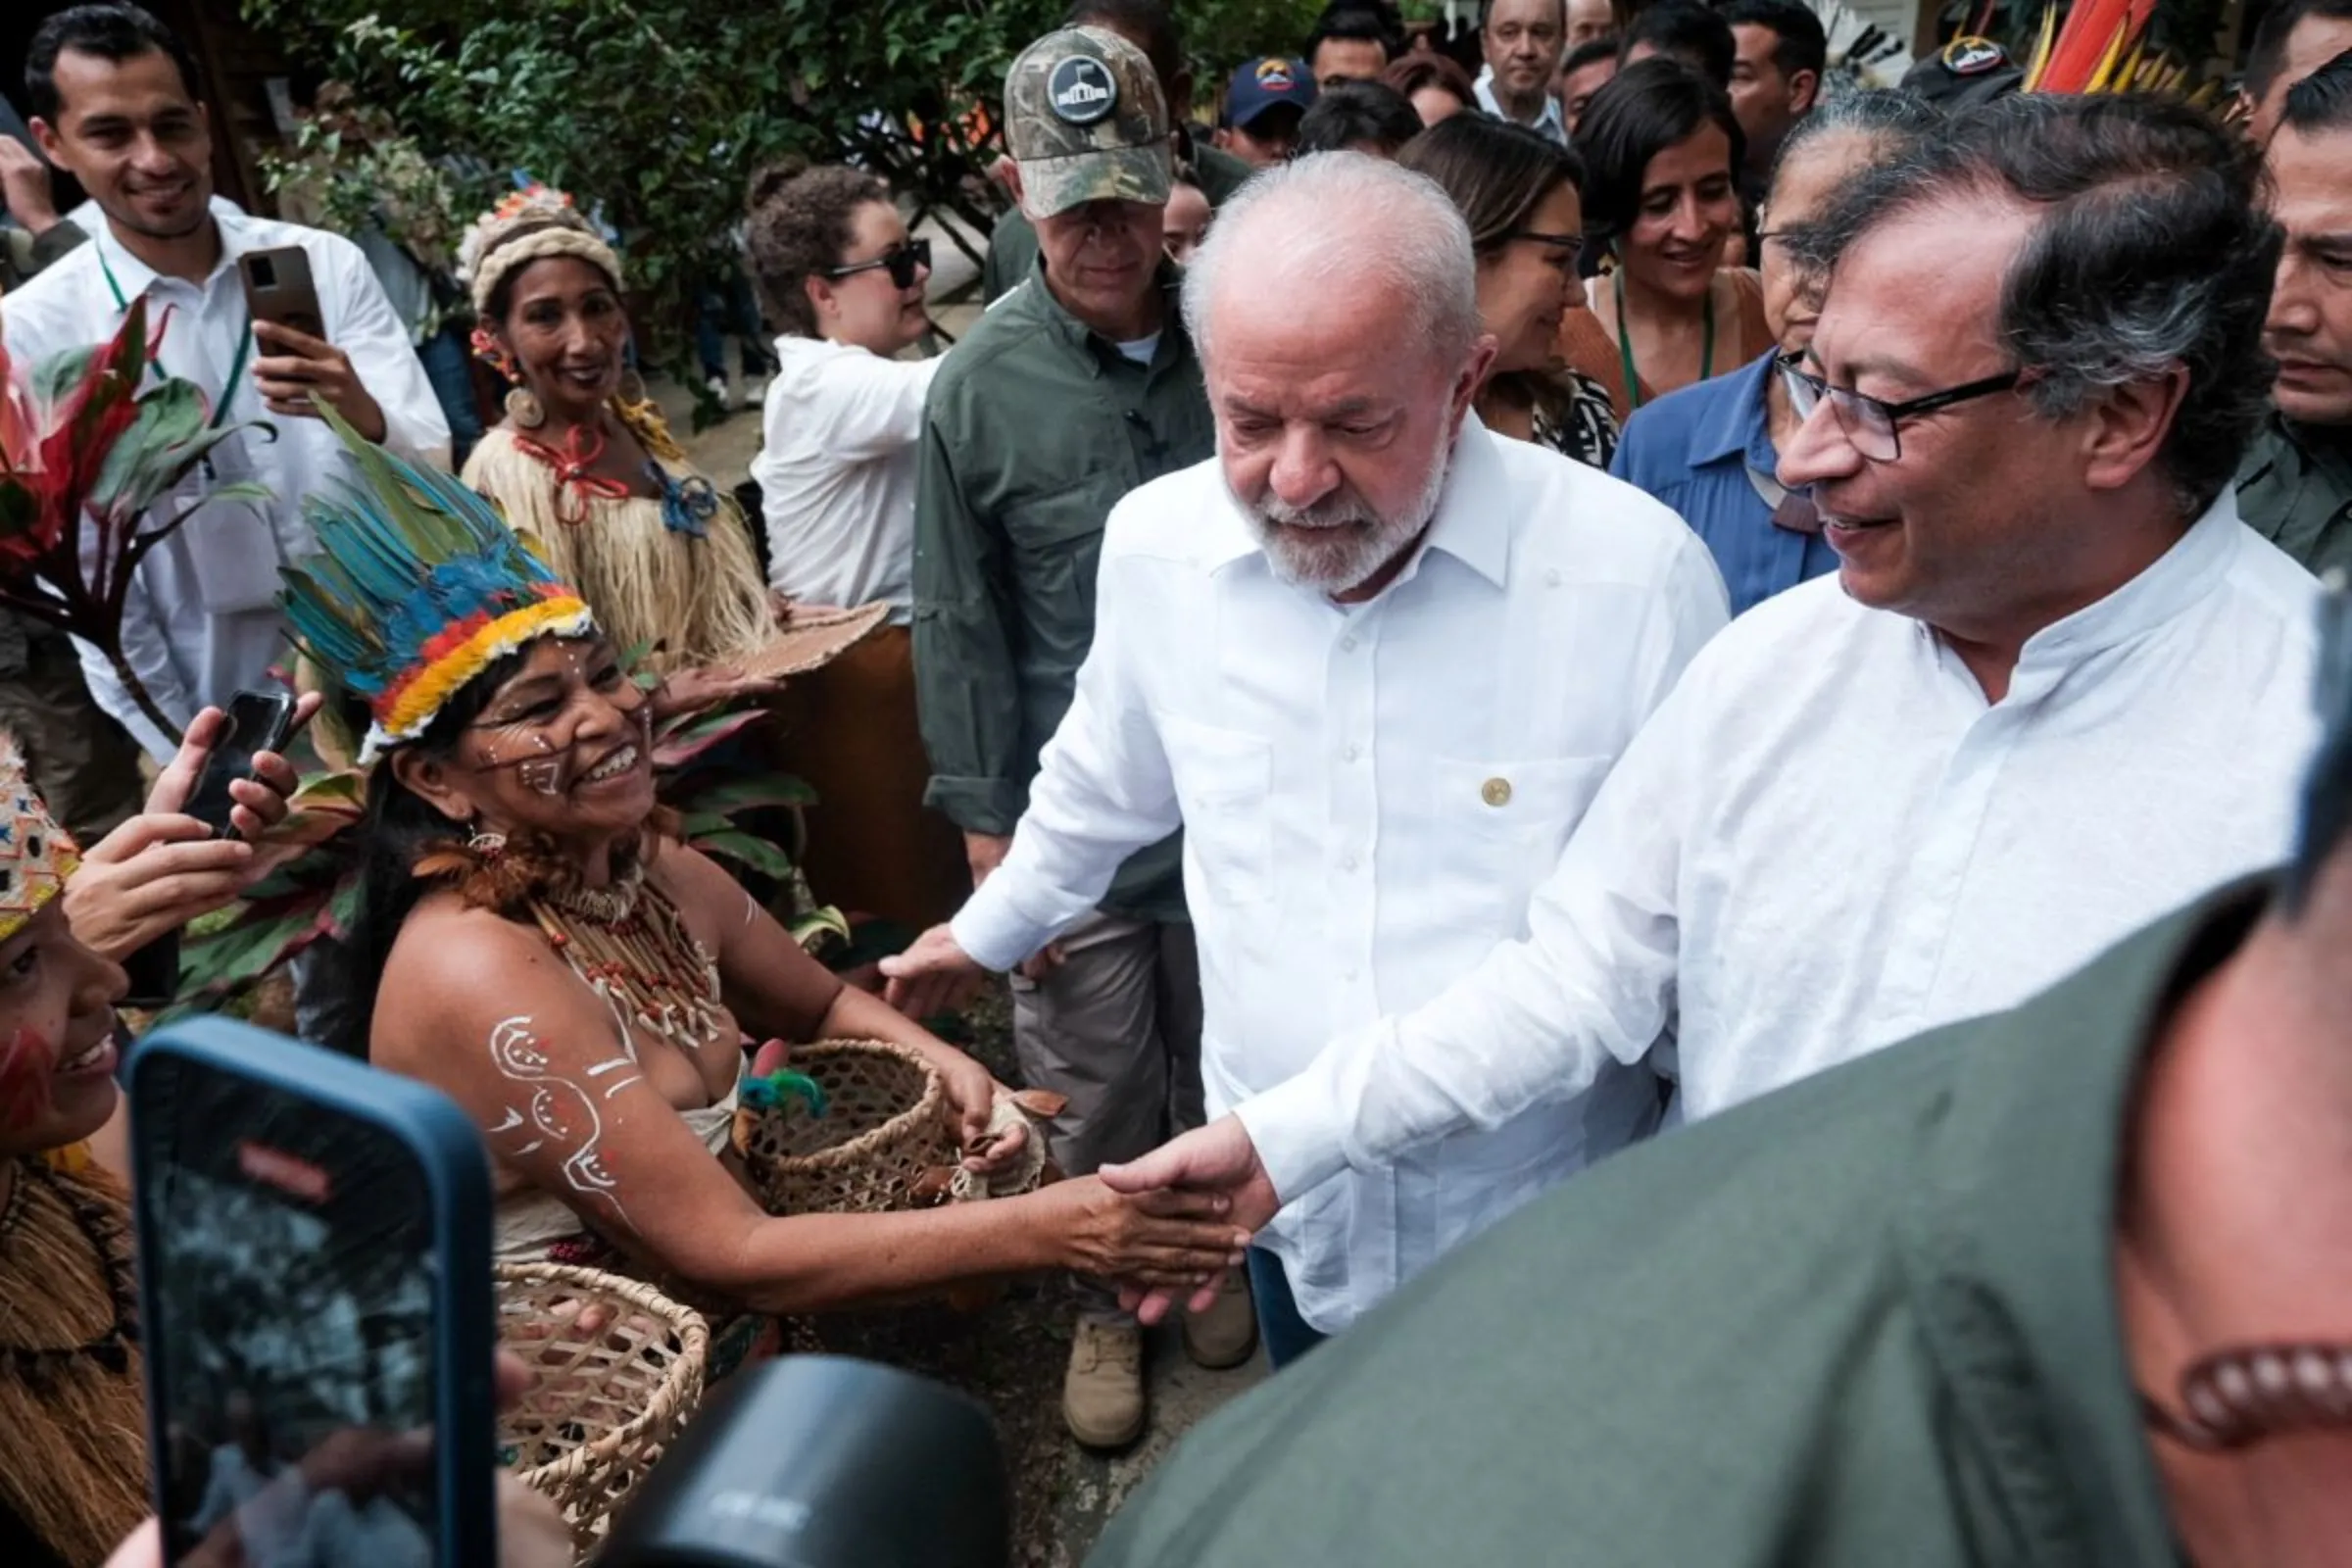 Colombian President Gustavo Petro and Brazilian President Luiz Inacio Lula da Silva greet indigenous people upon their arrival at the event 'Road to the Amazon Summit' in Leticia, Colombia July 8, 2023. Colombian Presidency/Handout via REUTERS